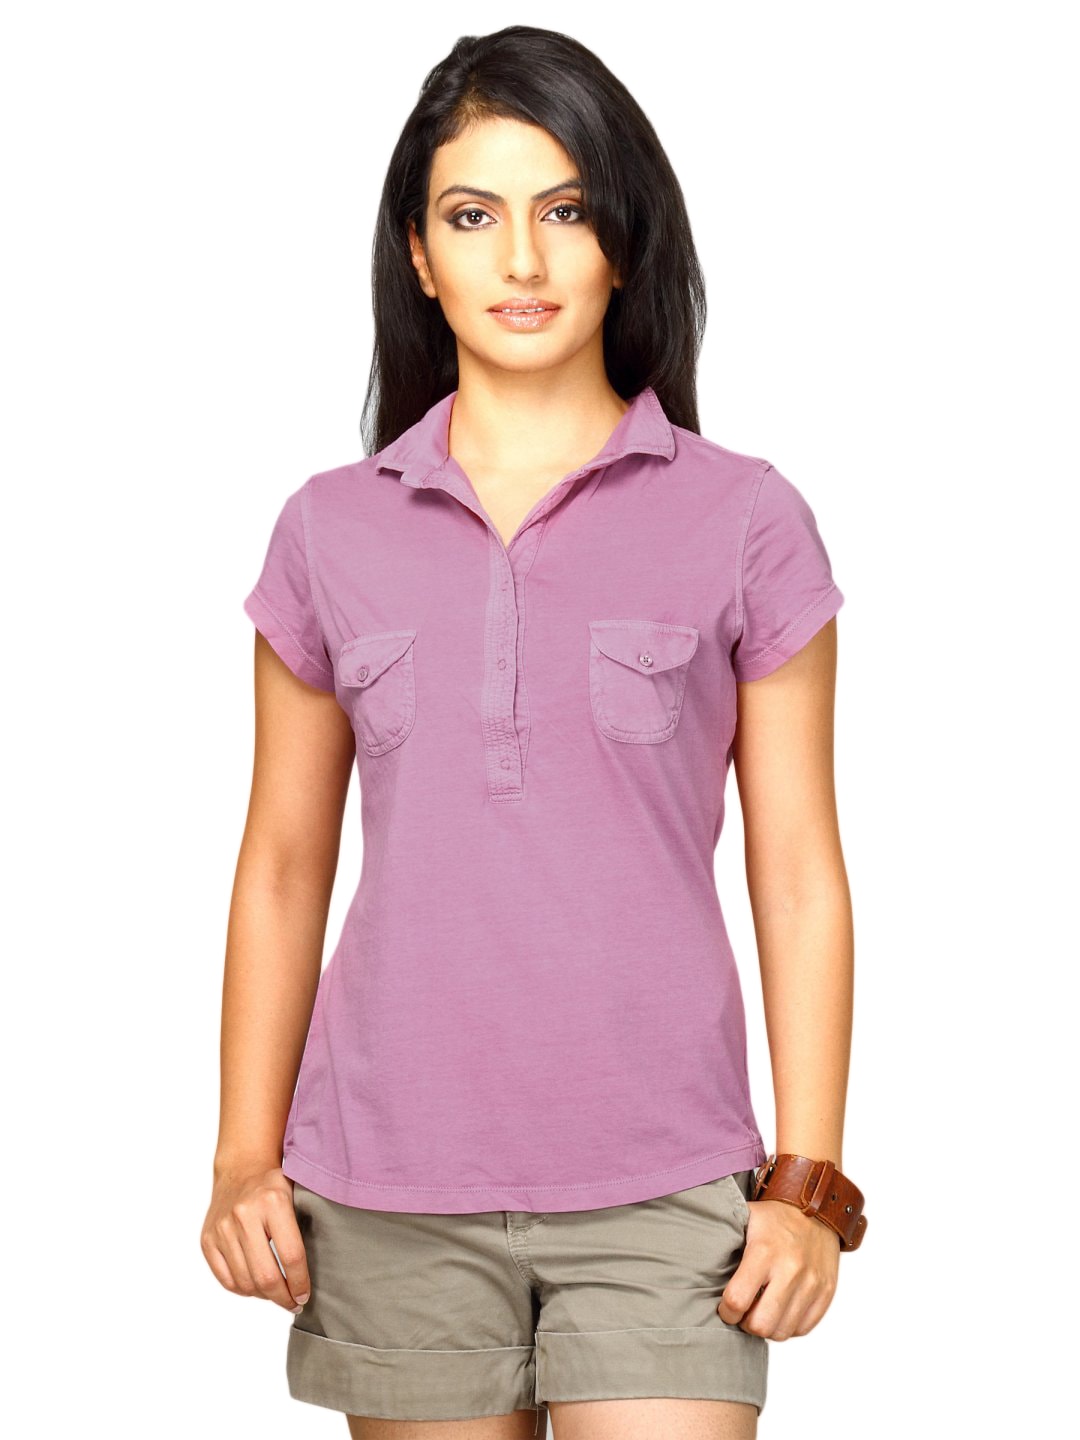 UCB Women's Short Sleeve Polo Pink Top